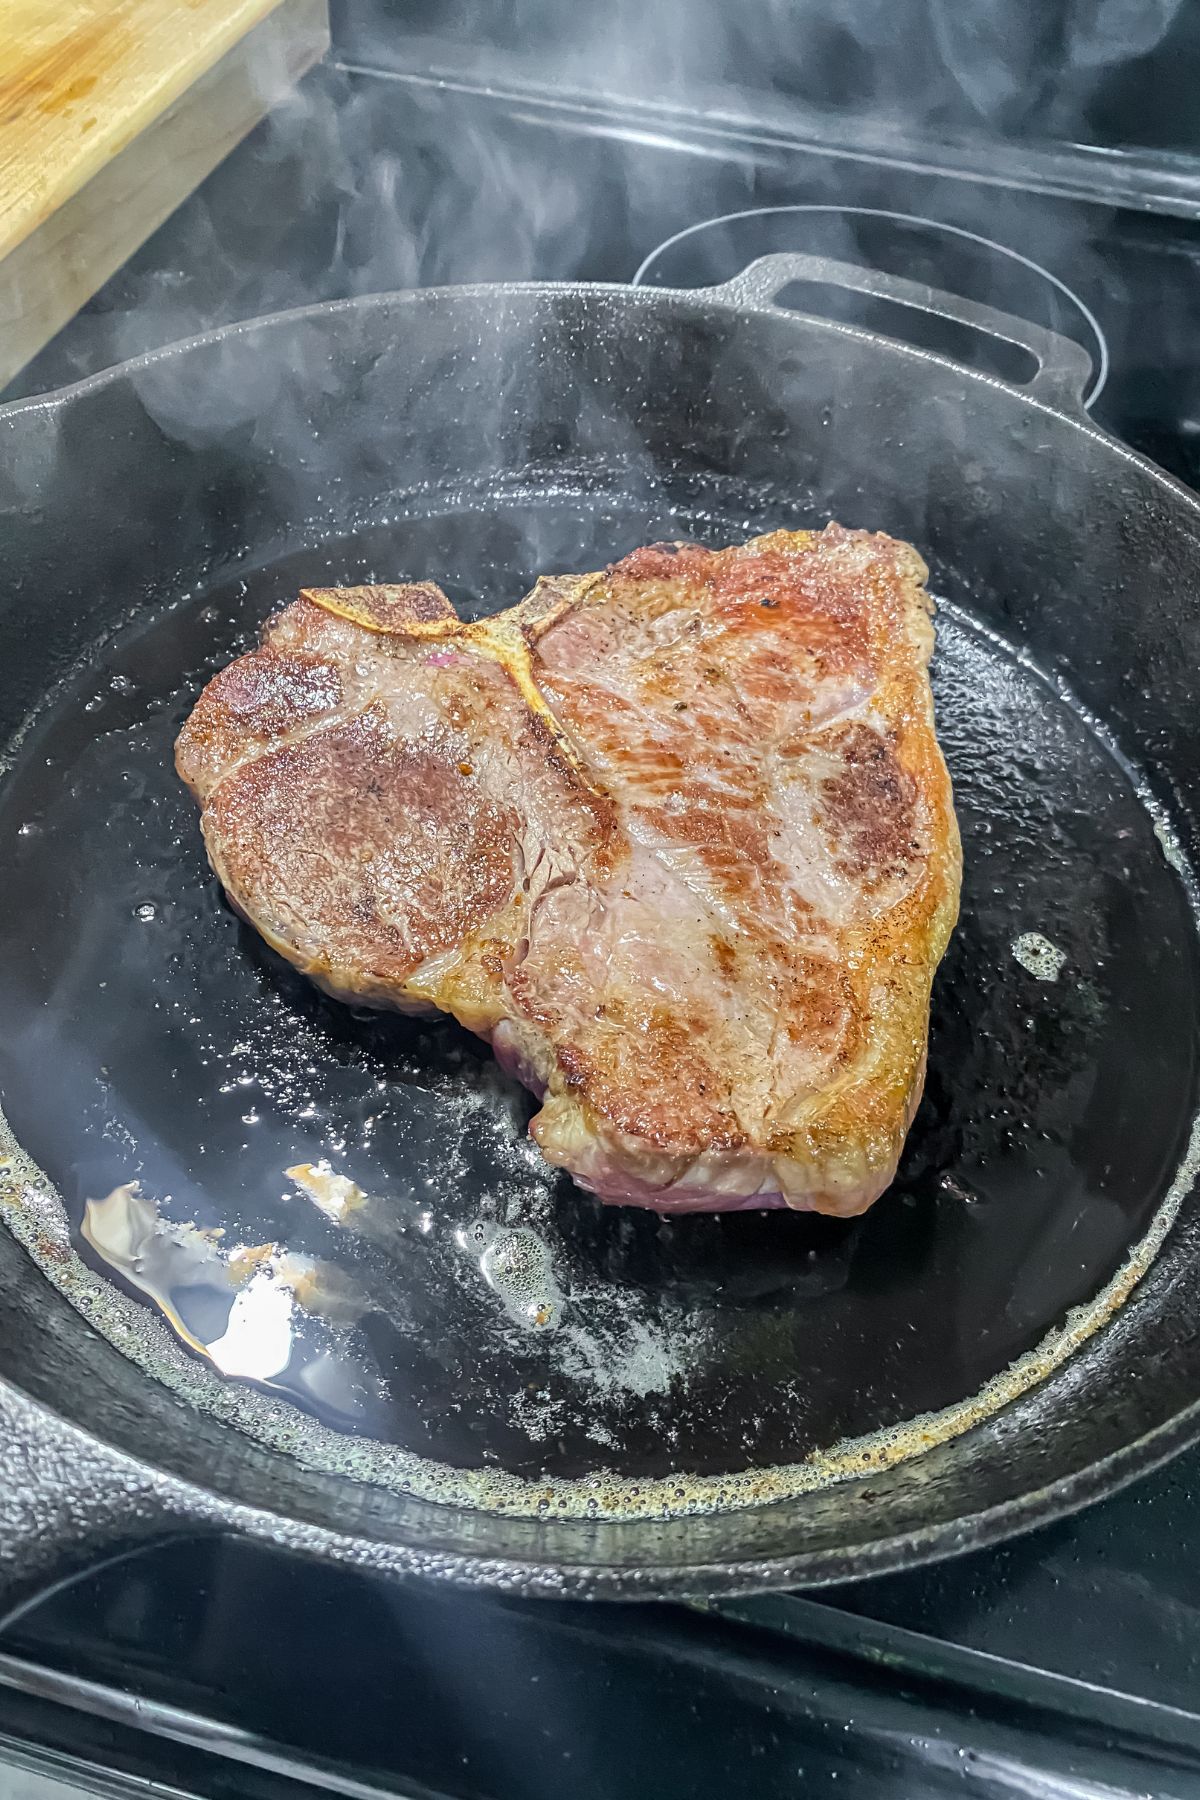 A steak is being cooked in a frying pan.